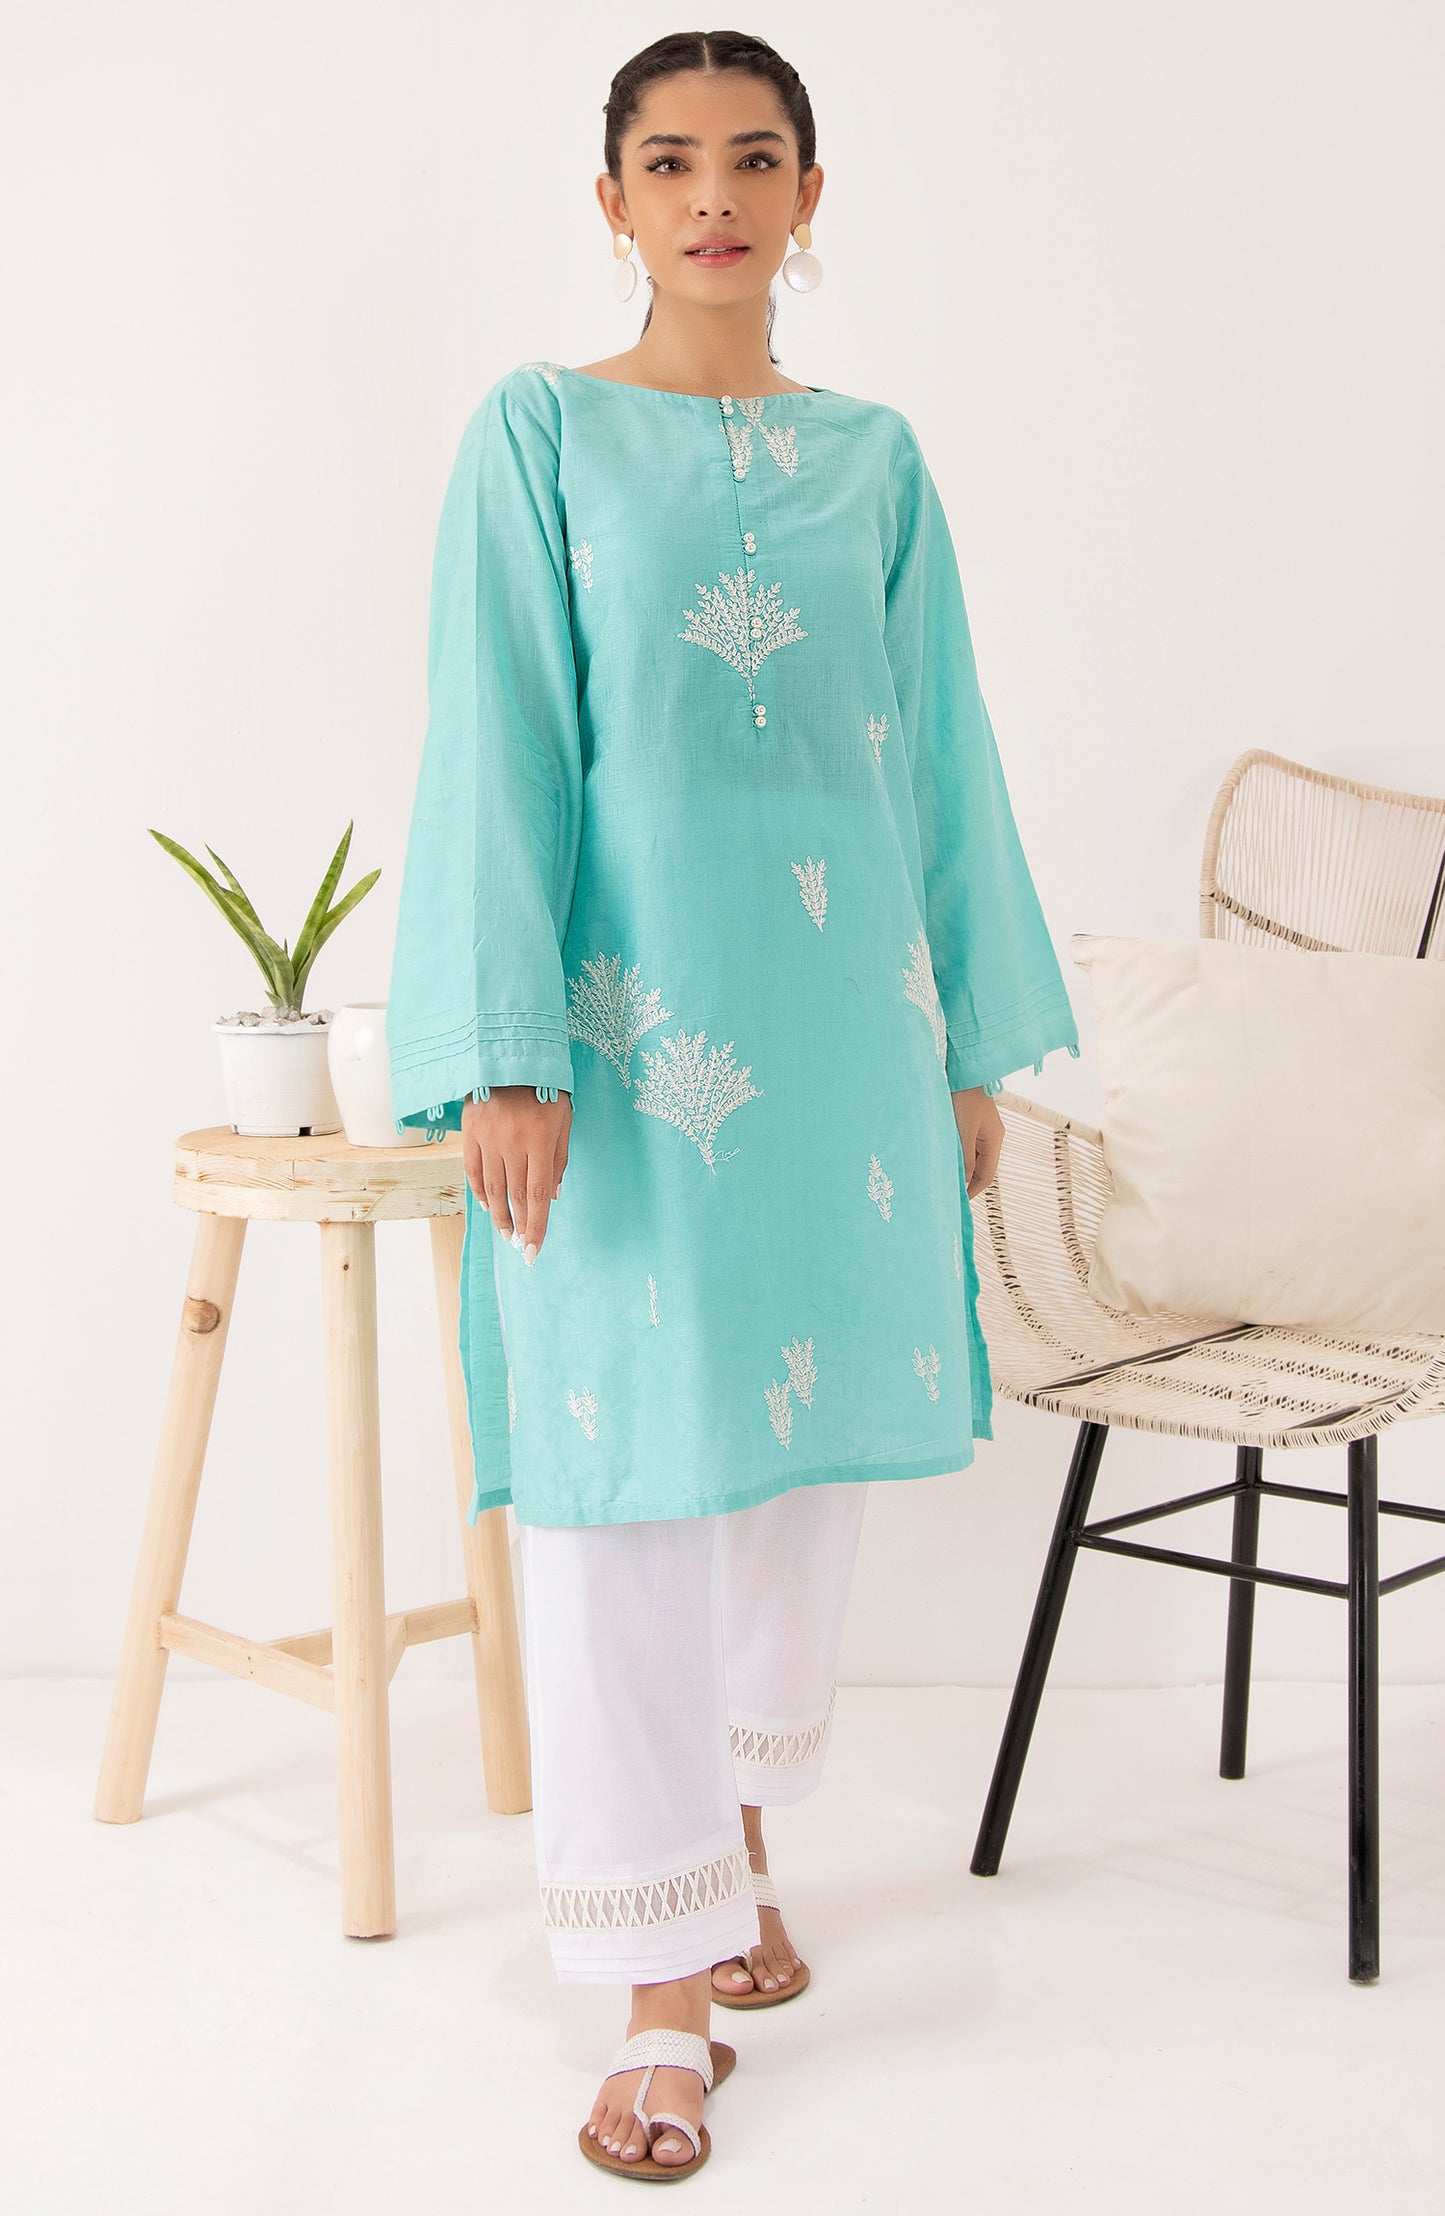 Stitched 1 Piece Embroidered Jacquard Shirt (NREK-63/S TEAL)